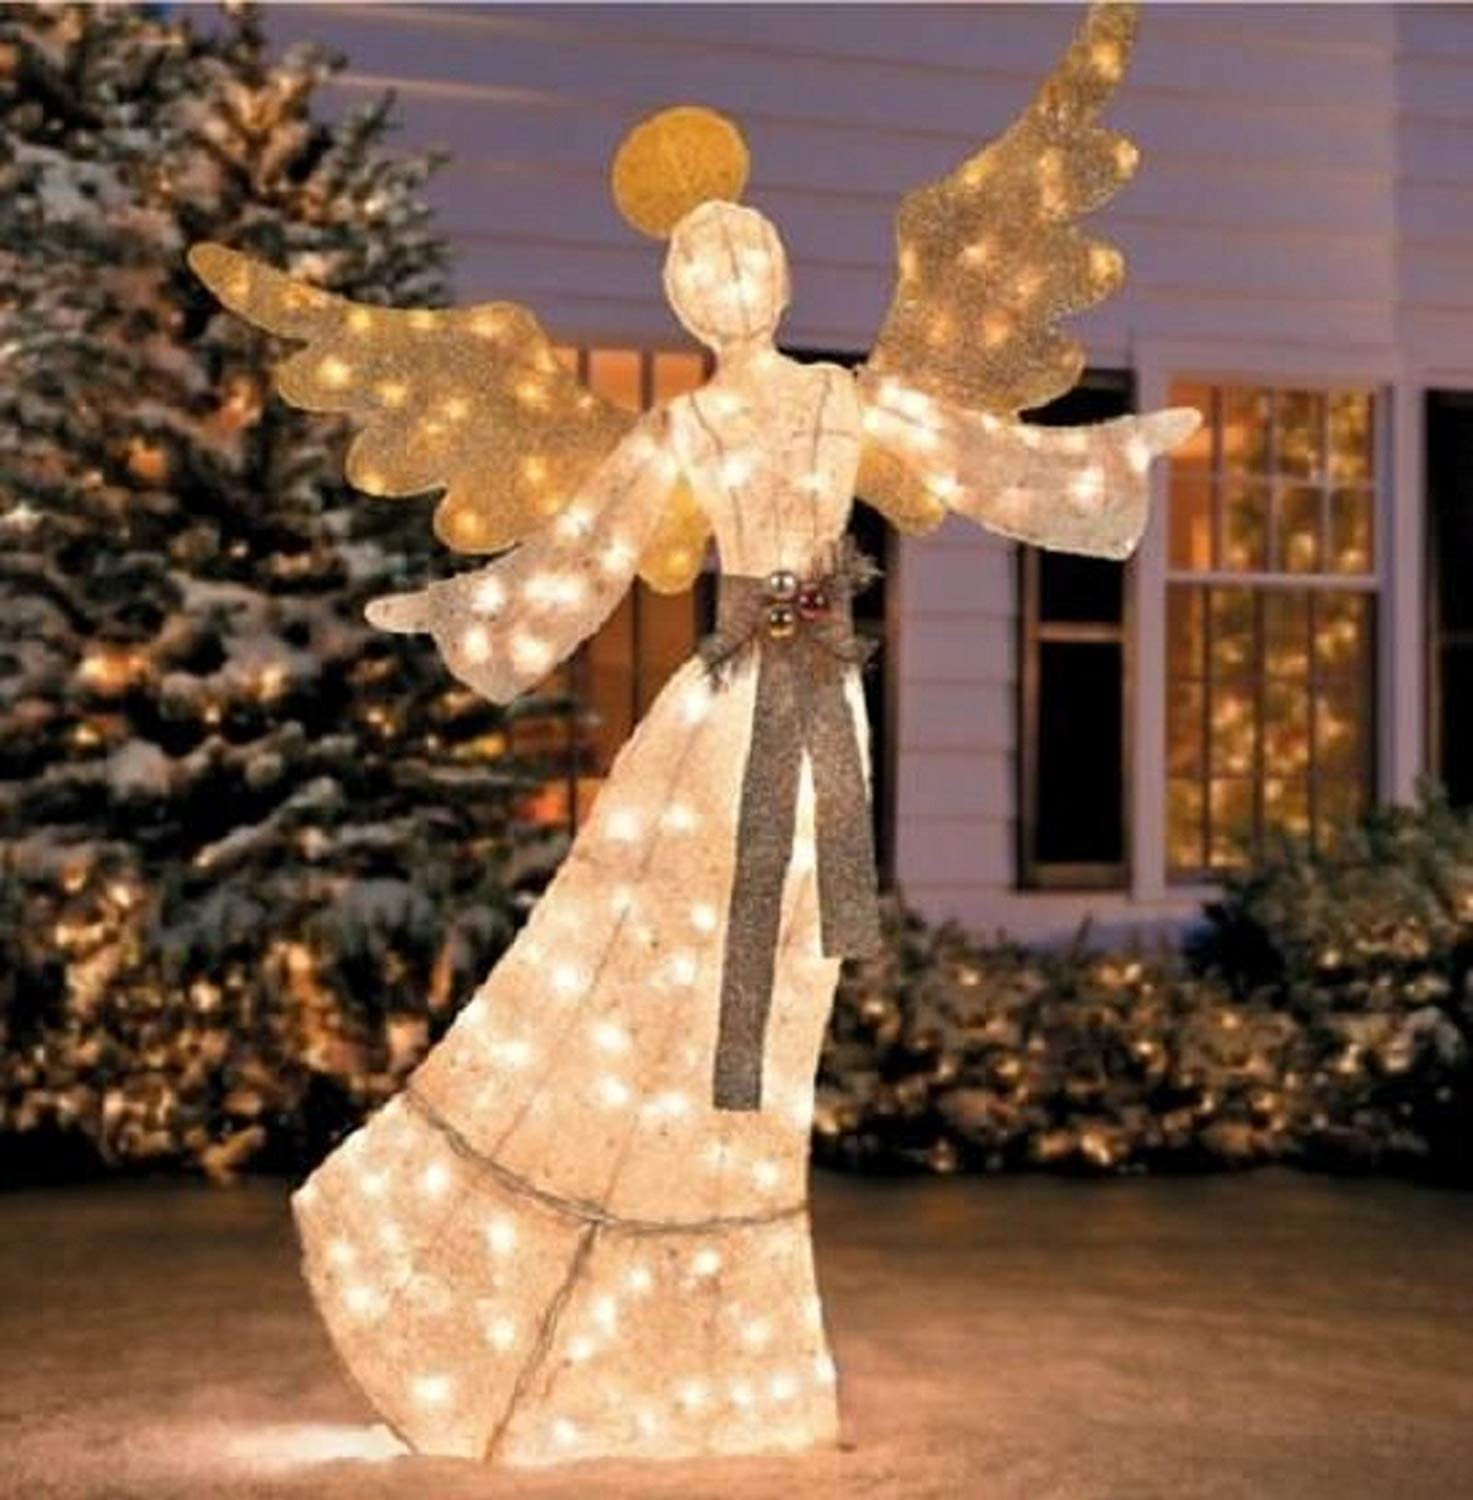 Lighted Outdoor Christmas Decorations
 Angels Lighted Yard Displays